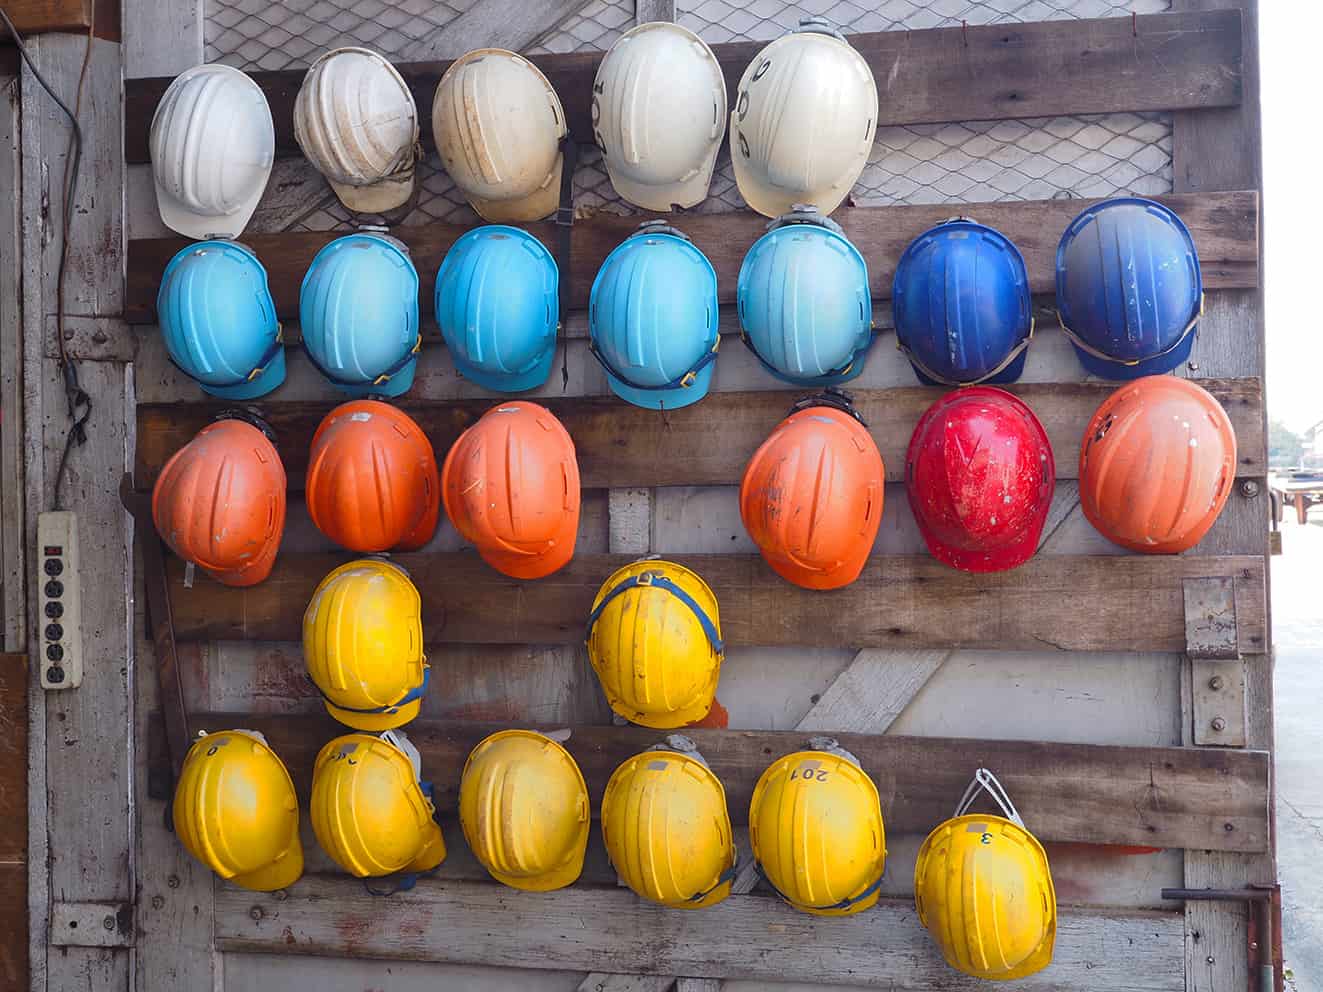 Wall filled with hard hats